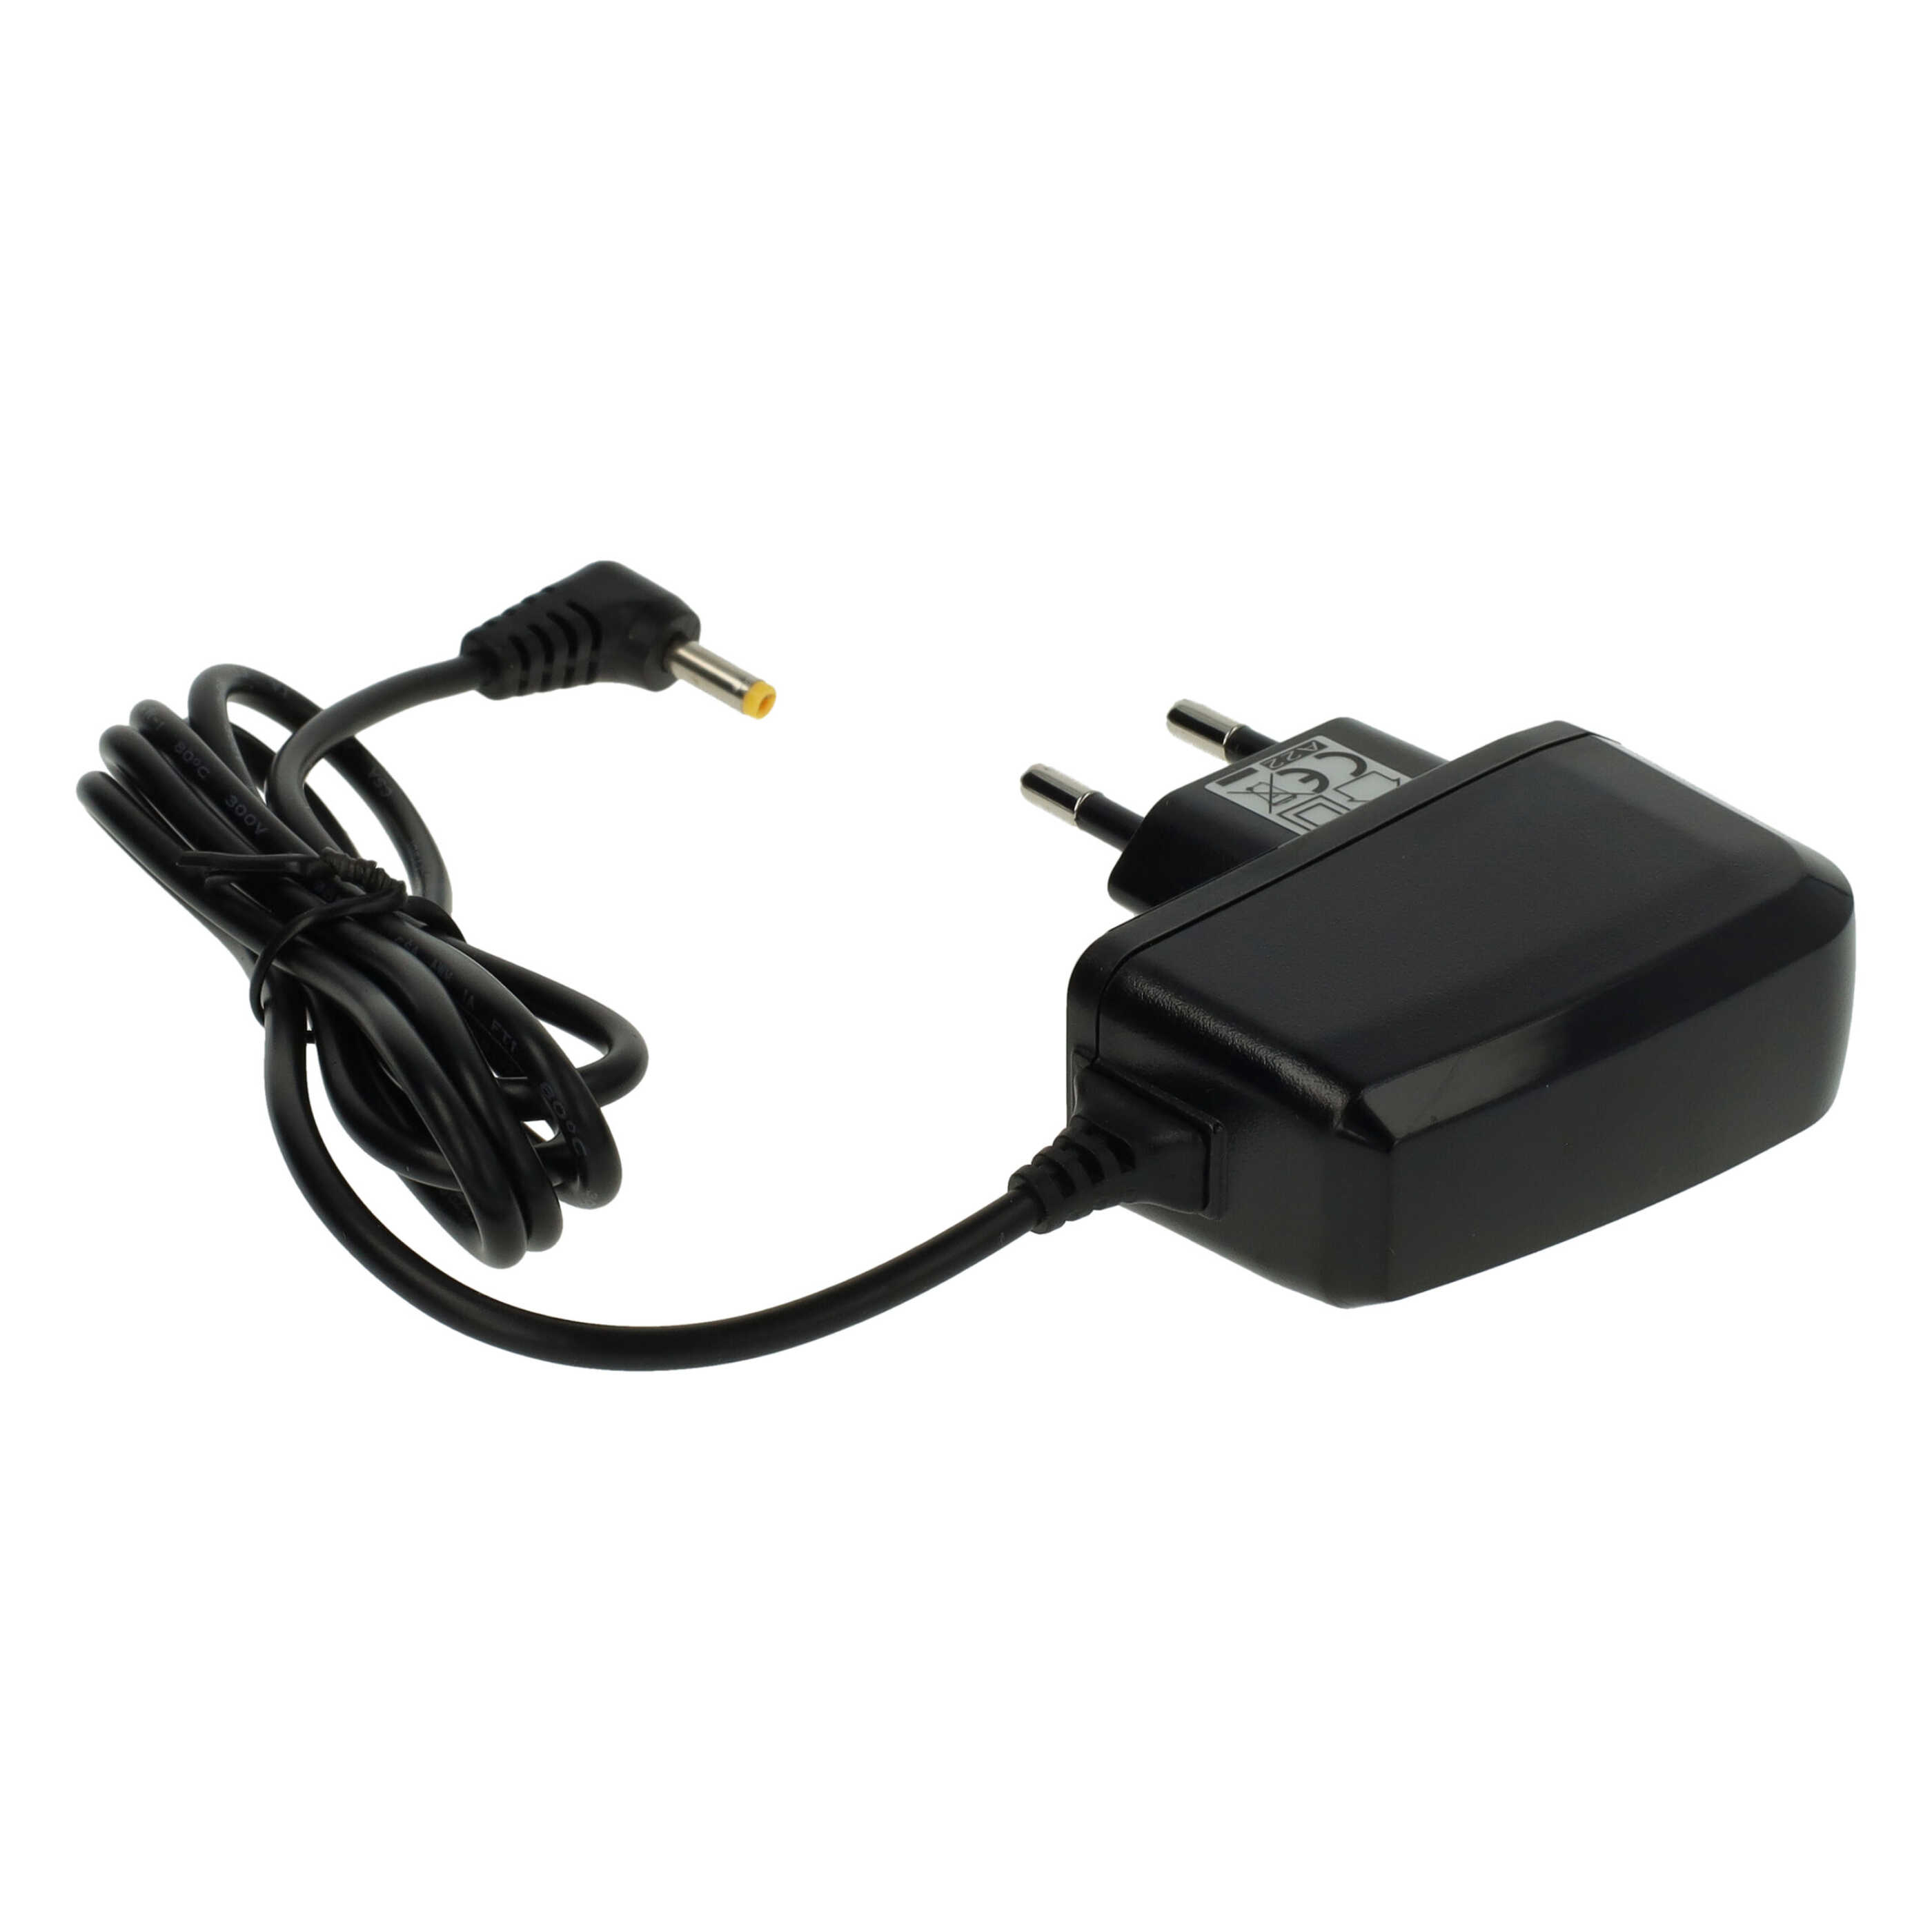 Charger suitable for e310 ToshibaNavigation Device etc. - 2.0 A